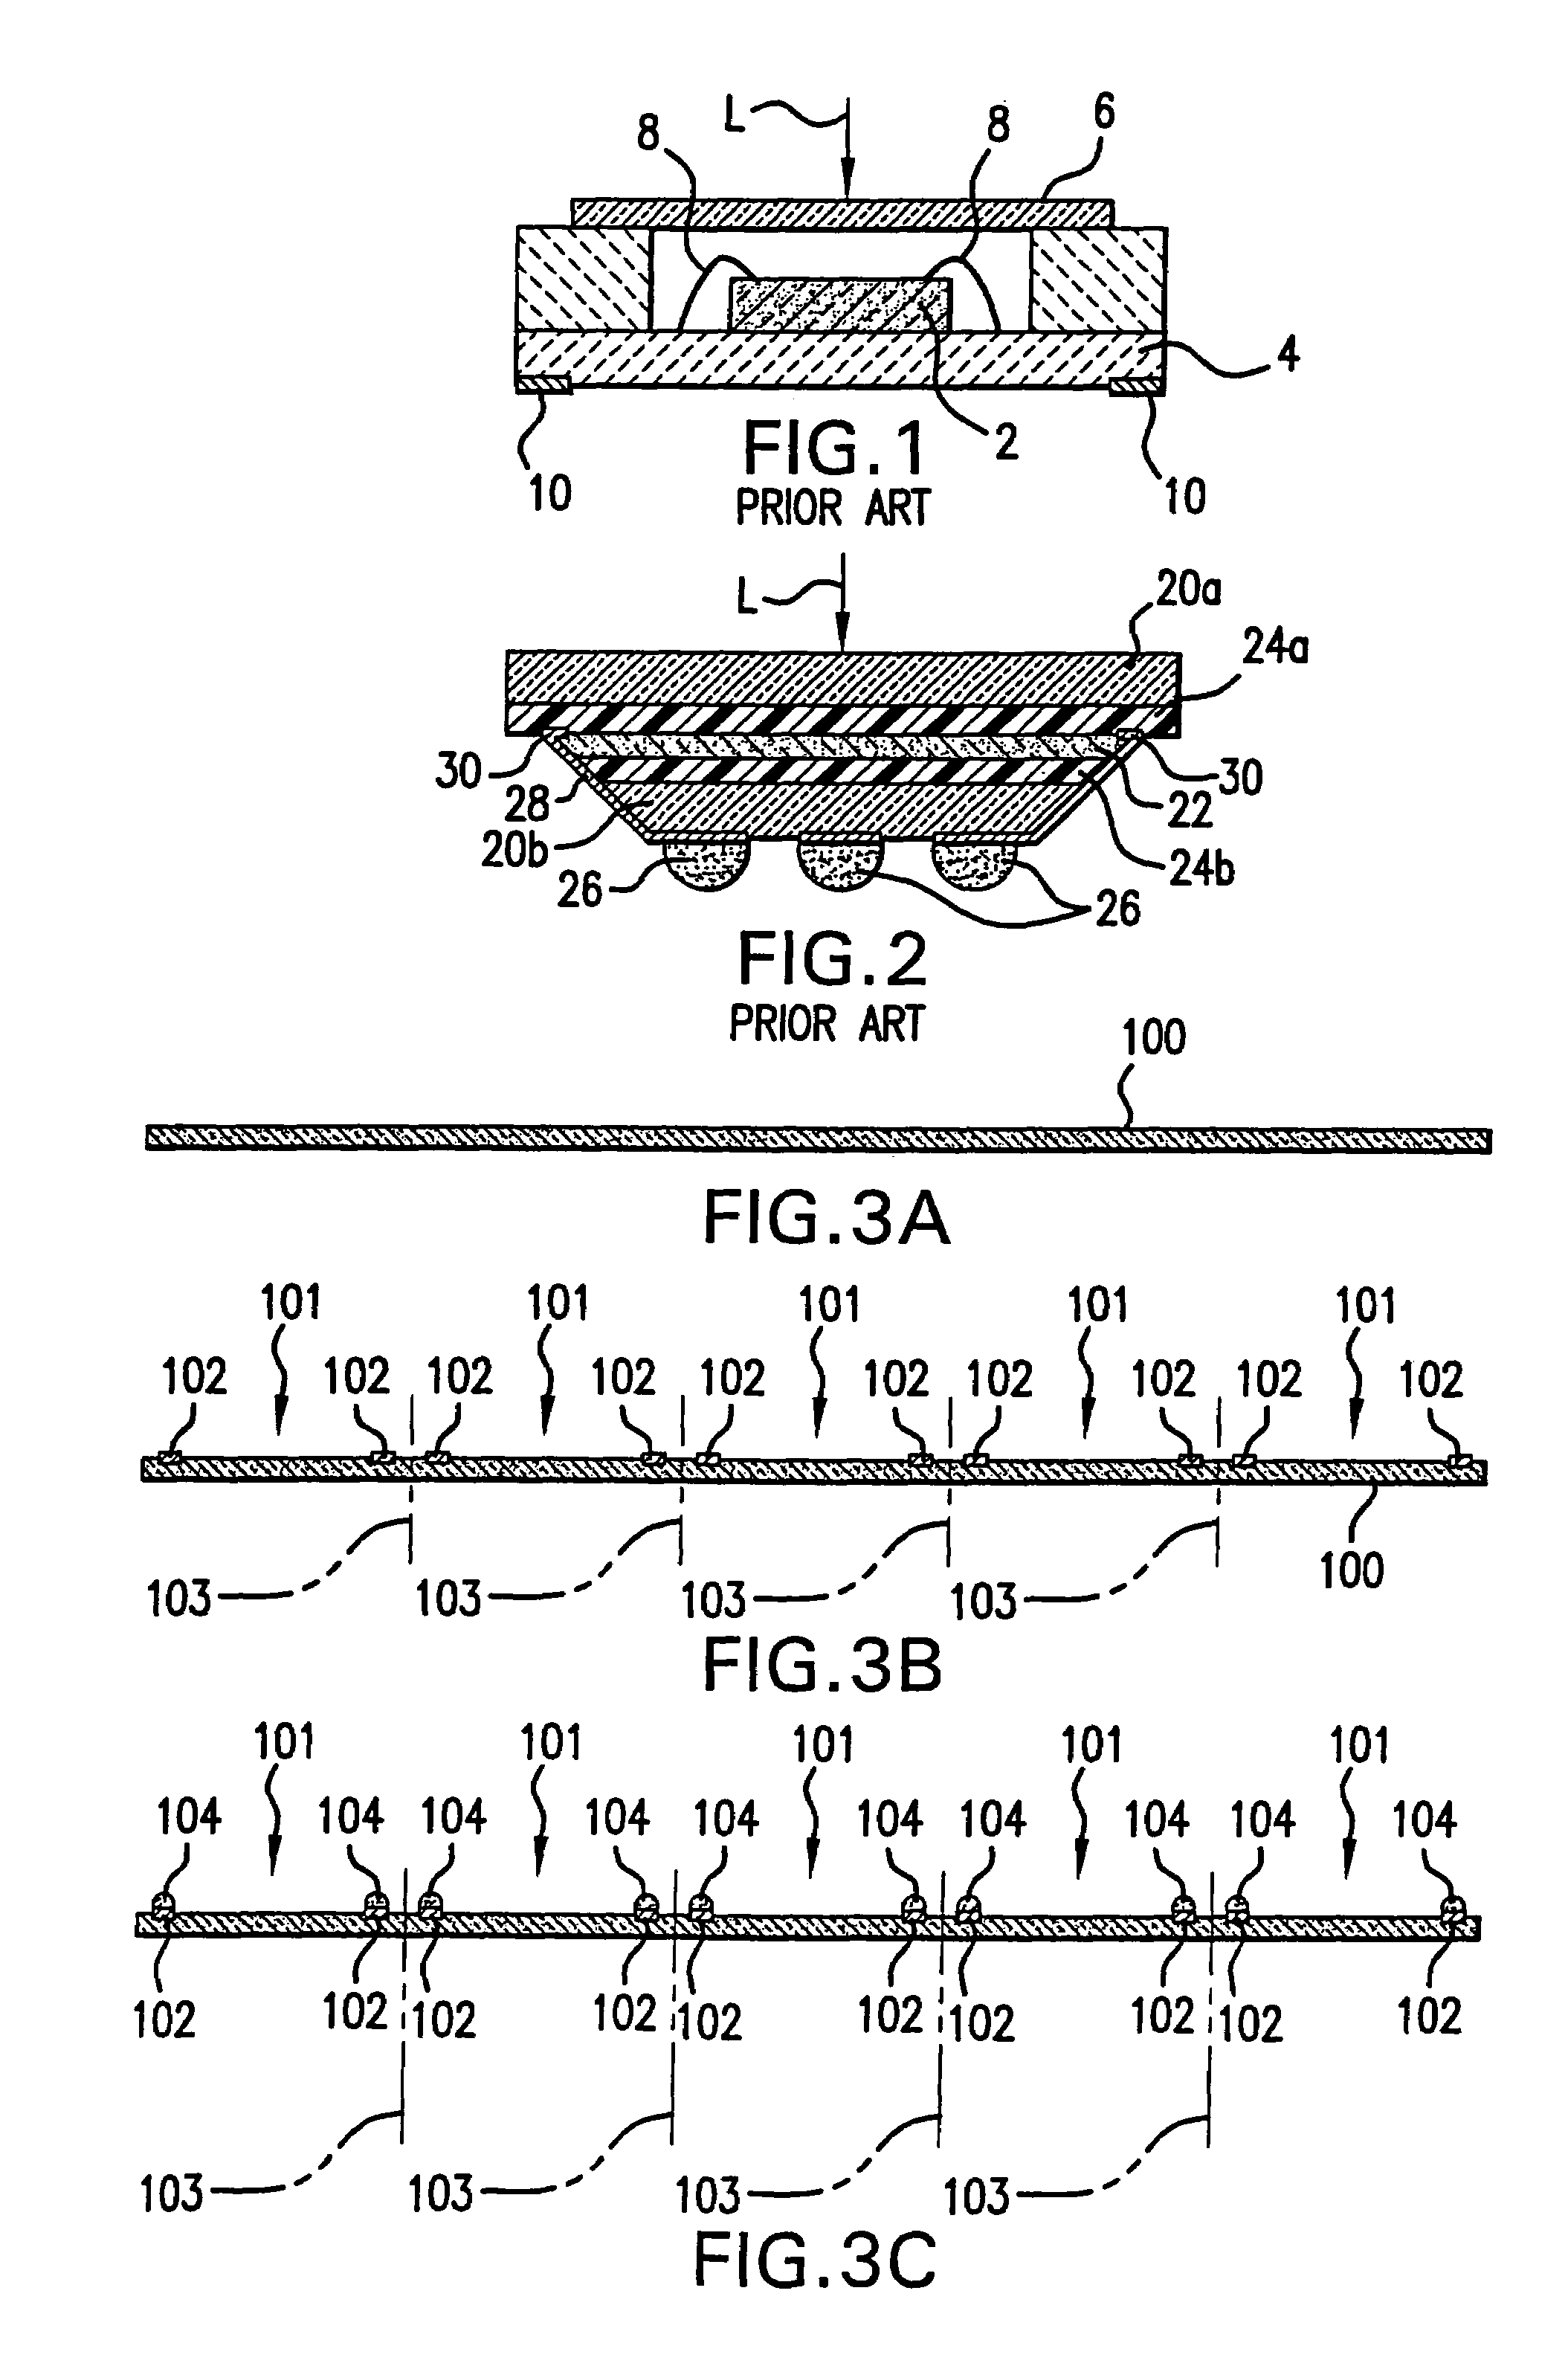 Electronic package of photo-sensing semiconductor devices, and the fabrication and assembly thereof